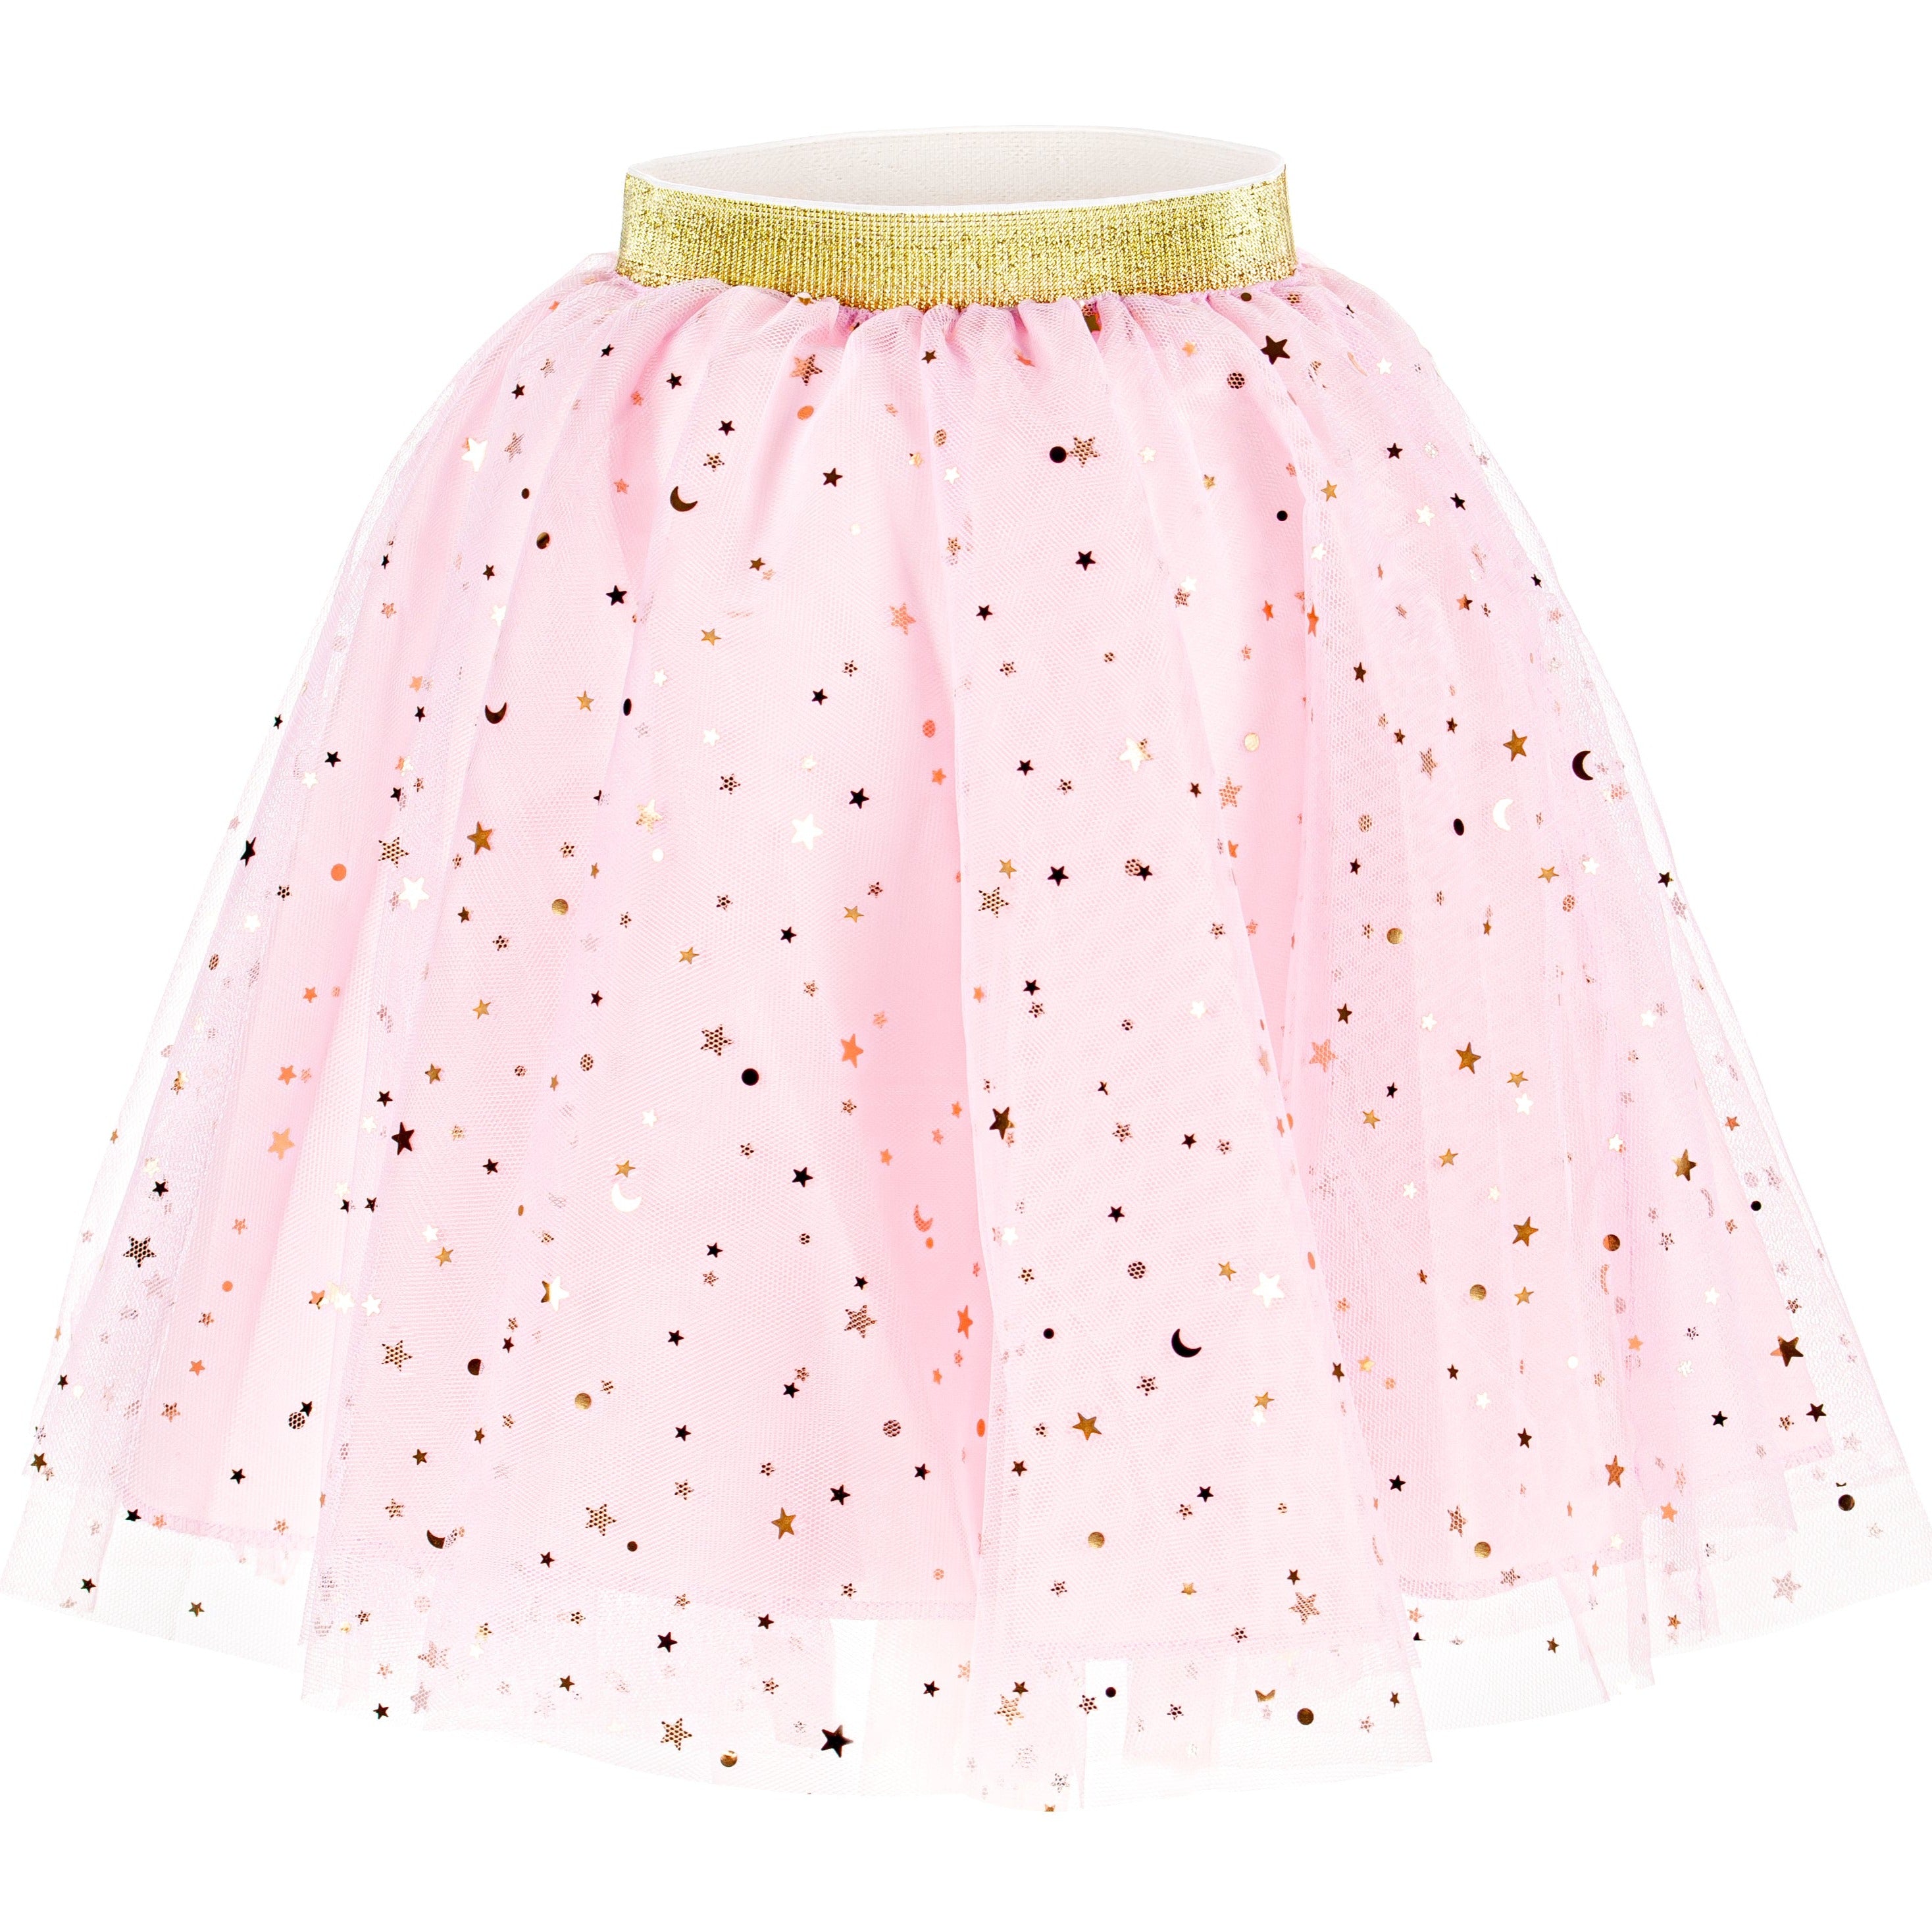 PartyDeco: Princess skirt disguise